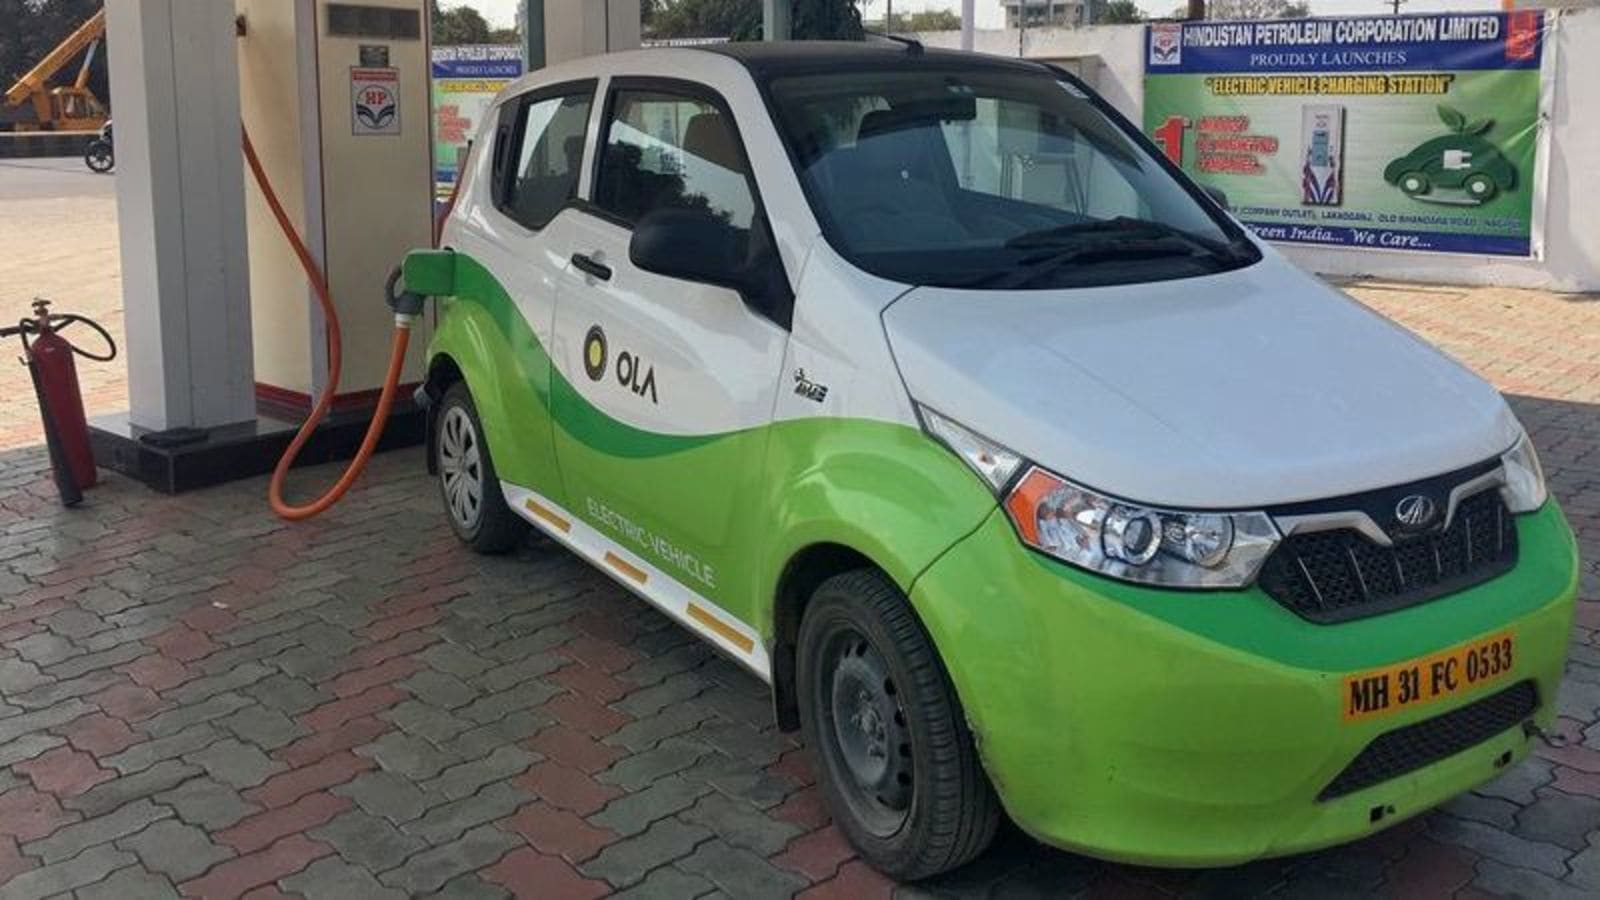 Ola EV cabs launched in London, company's first ever electric vehicle  category | Auto News